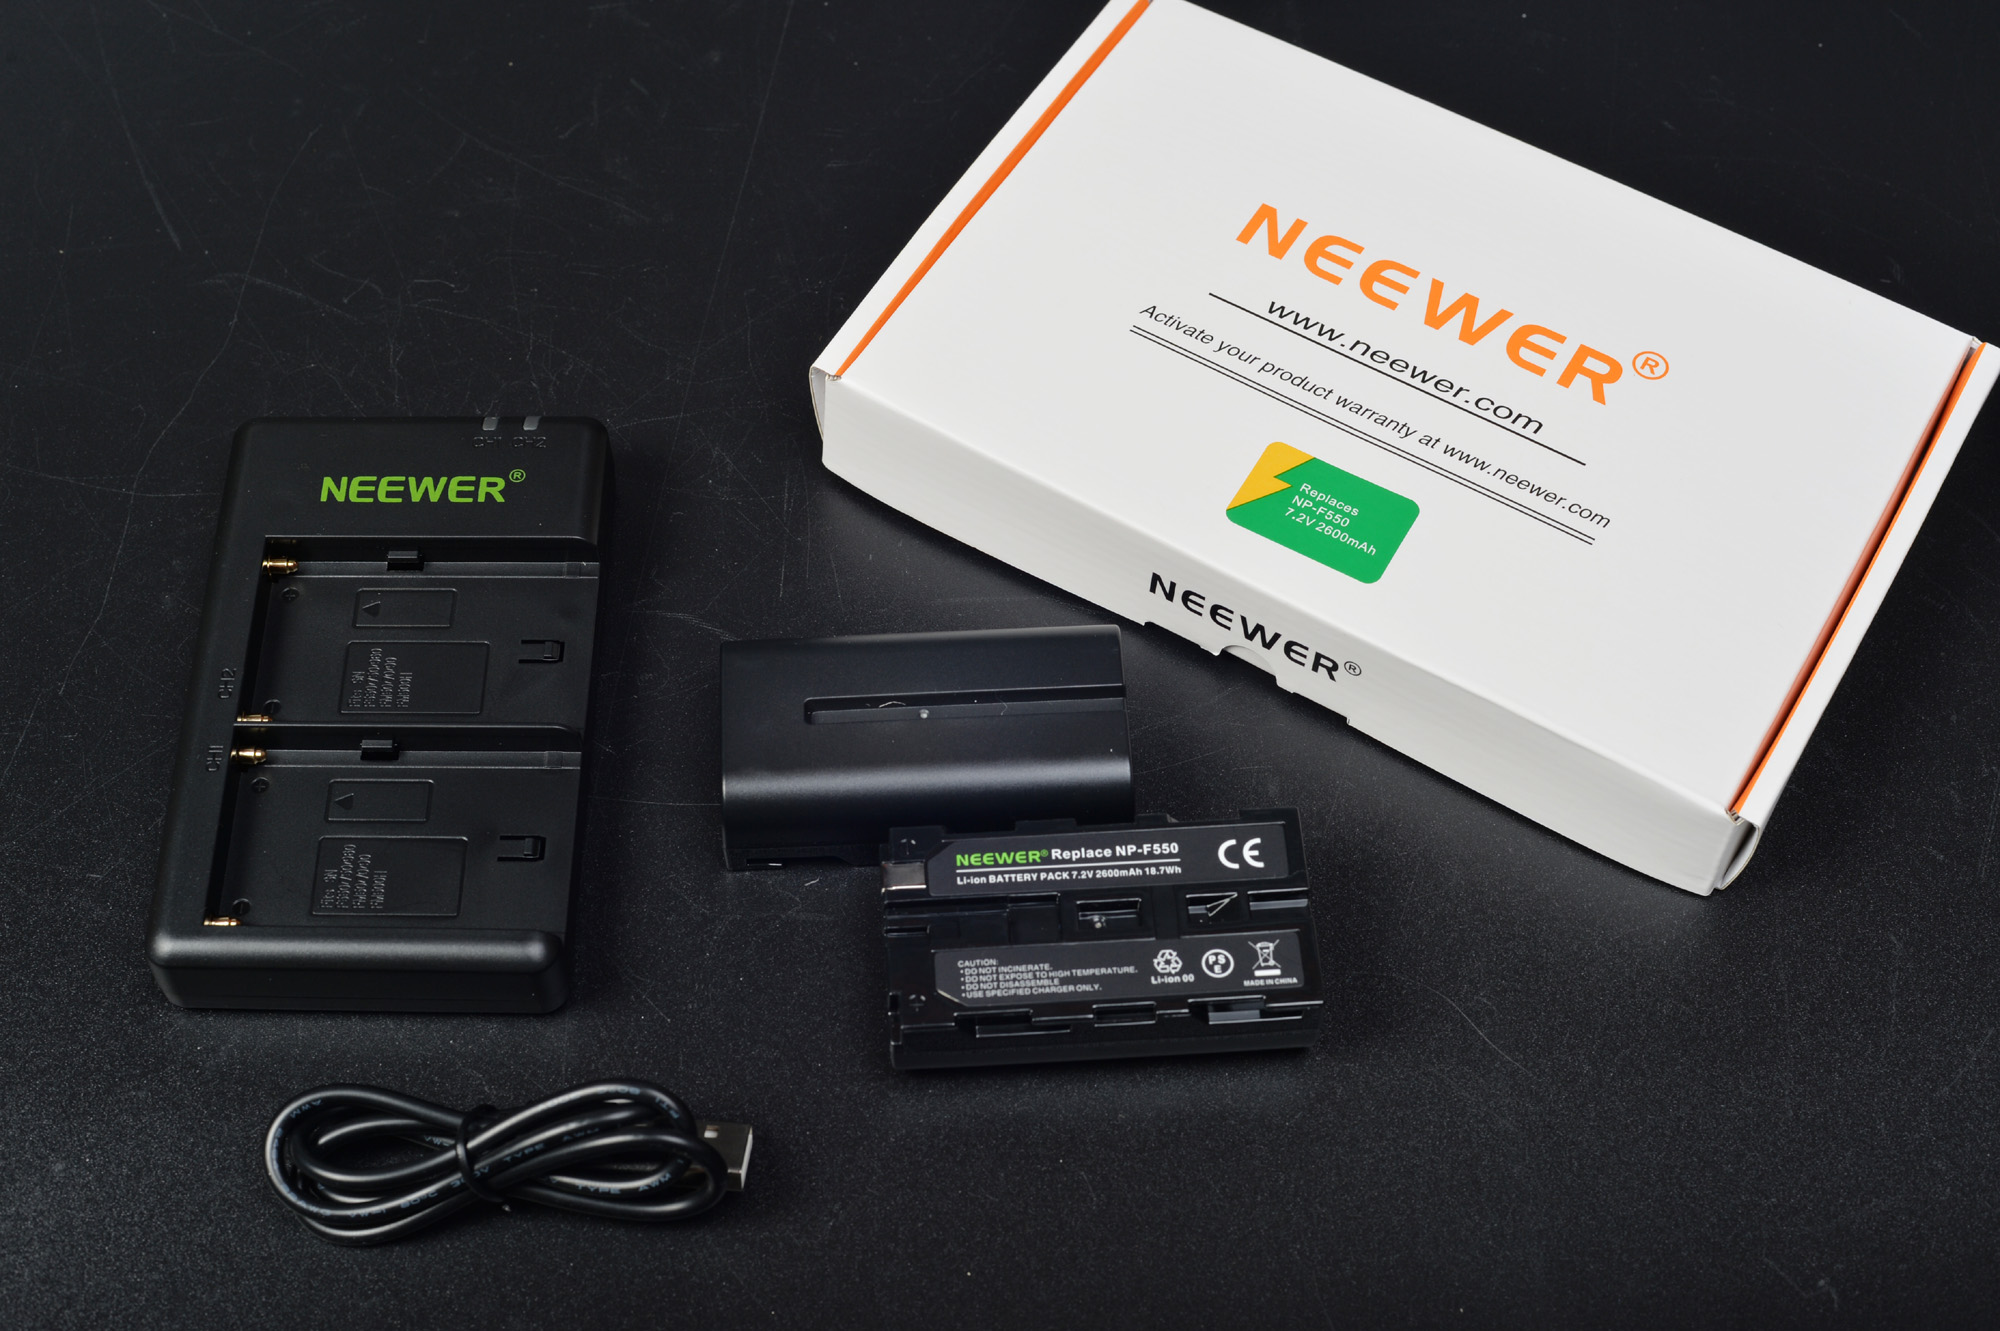 Neewer NP-F550バッテリー充電器セット　購入レビュー